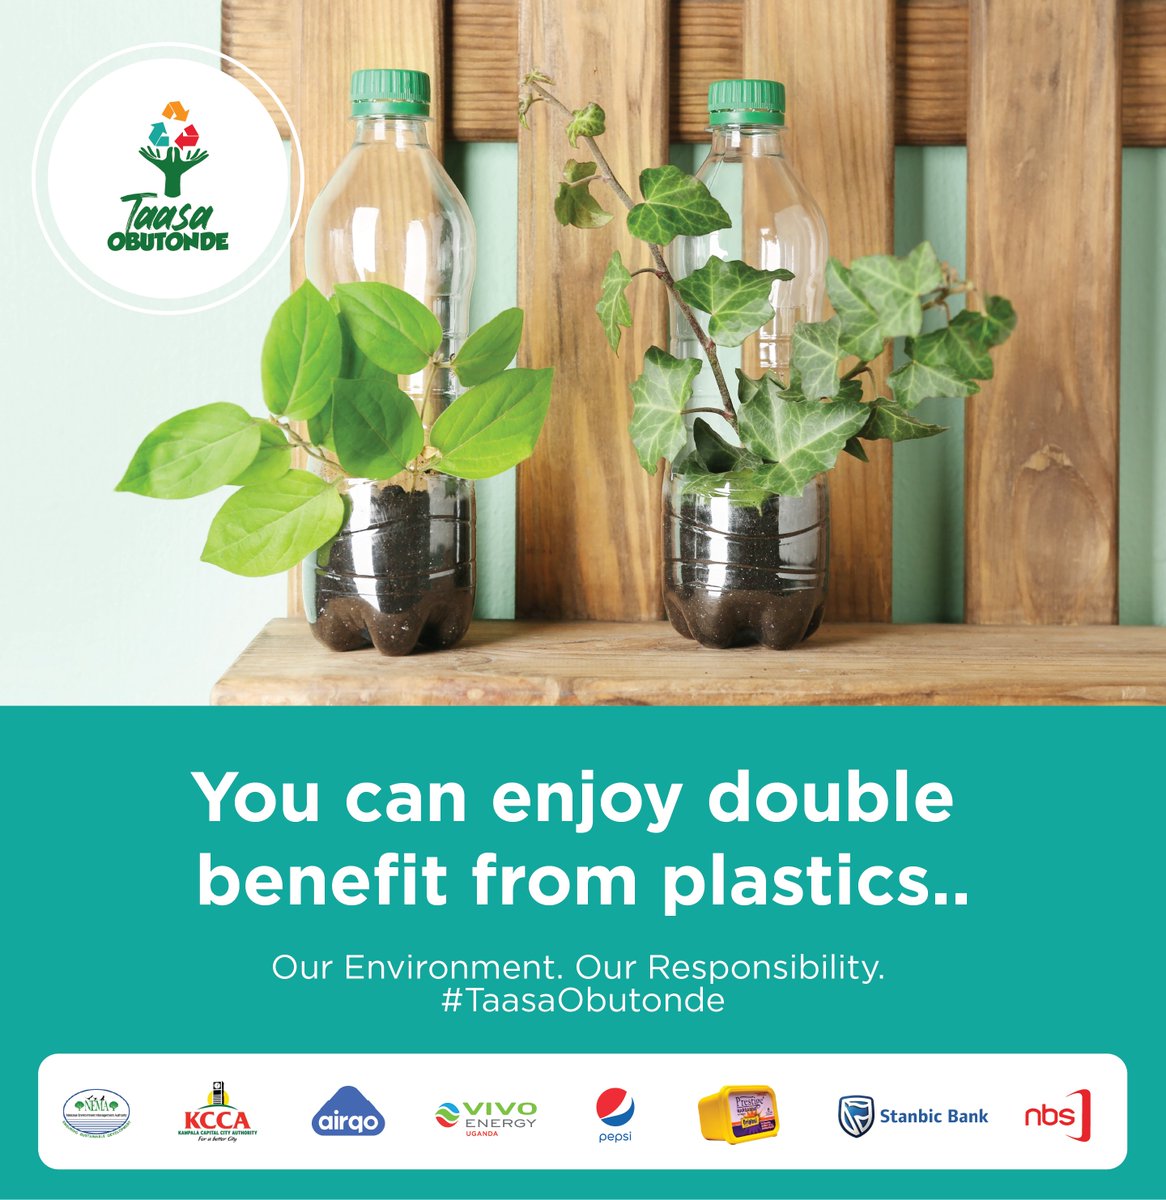 Reusing plastics is a creative way to minimize waste. Show us how you repurpose plastic items in your daily routine, and inspire us with your innovative ideas.@nemaug @AirQoProject @KCCAUG @VivoEnergyUg @PepsiUganda @stanbicug @nbstv #TaasaObutonde